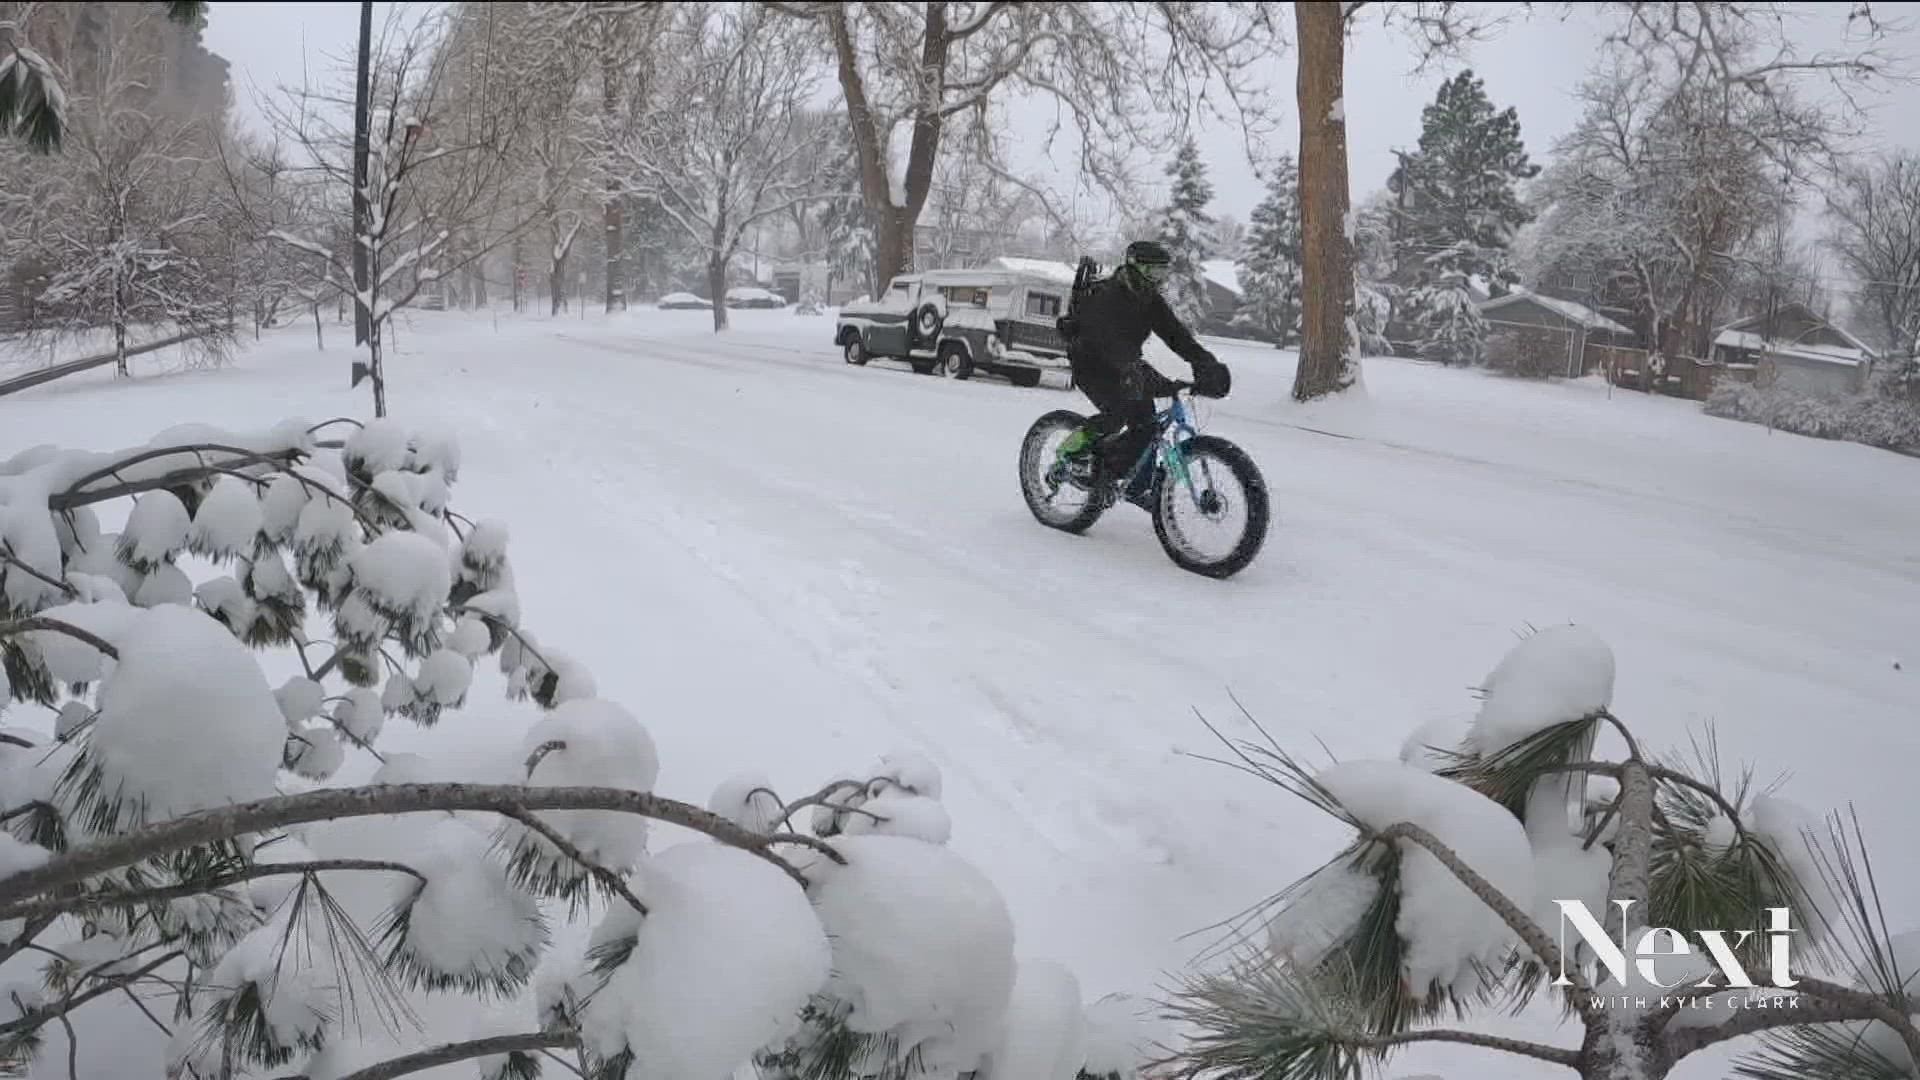 Denver got its biggest January snow in 30 years. That wasn't going to keep people inside.